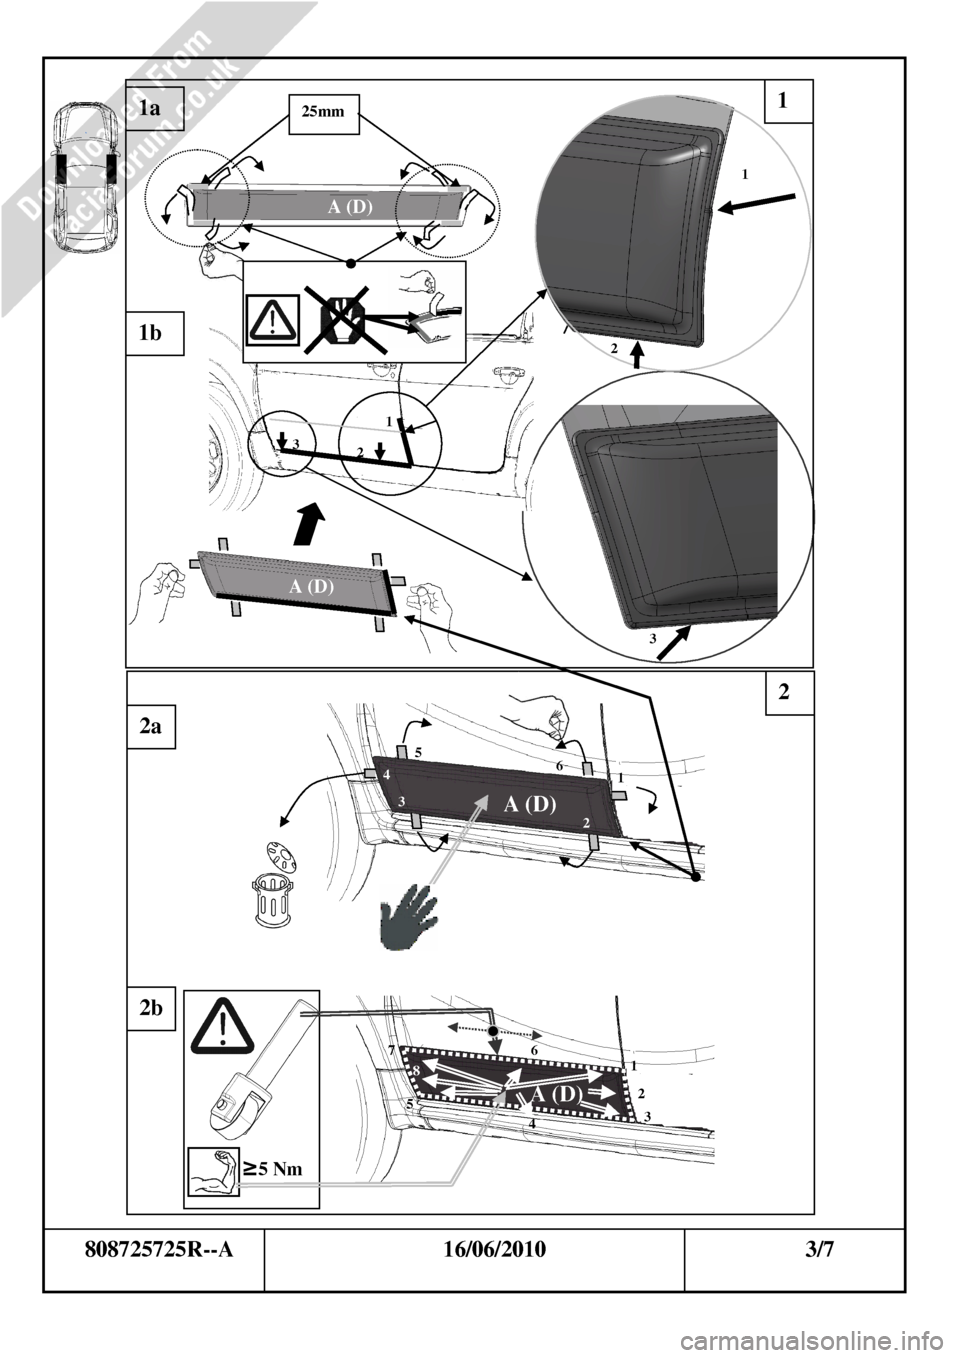 DACIA DUSTER 2010 1.G Door Mouldings Fitting Guide Workshop Manual                         
     
                         
      808725725R--A                                     1 6/06/2010                                              3/7 
        
2 
1 25mm 1a 
1b